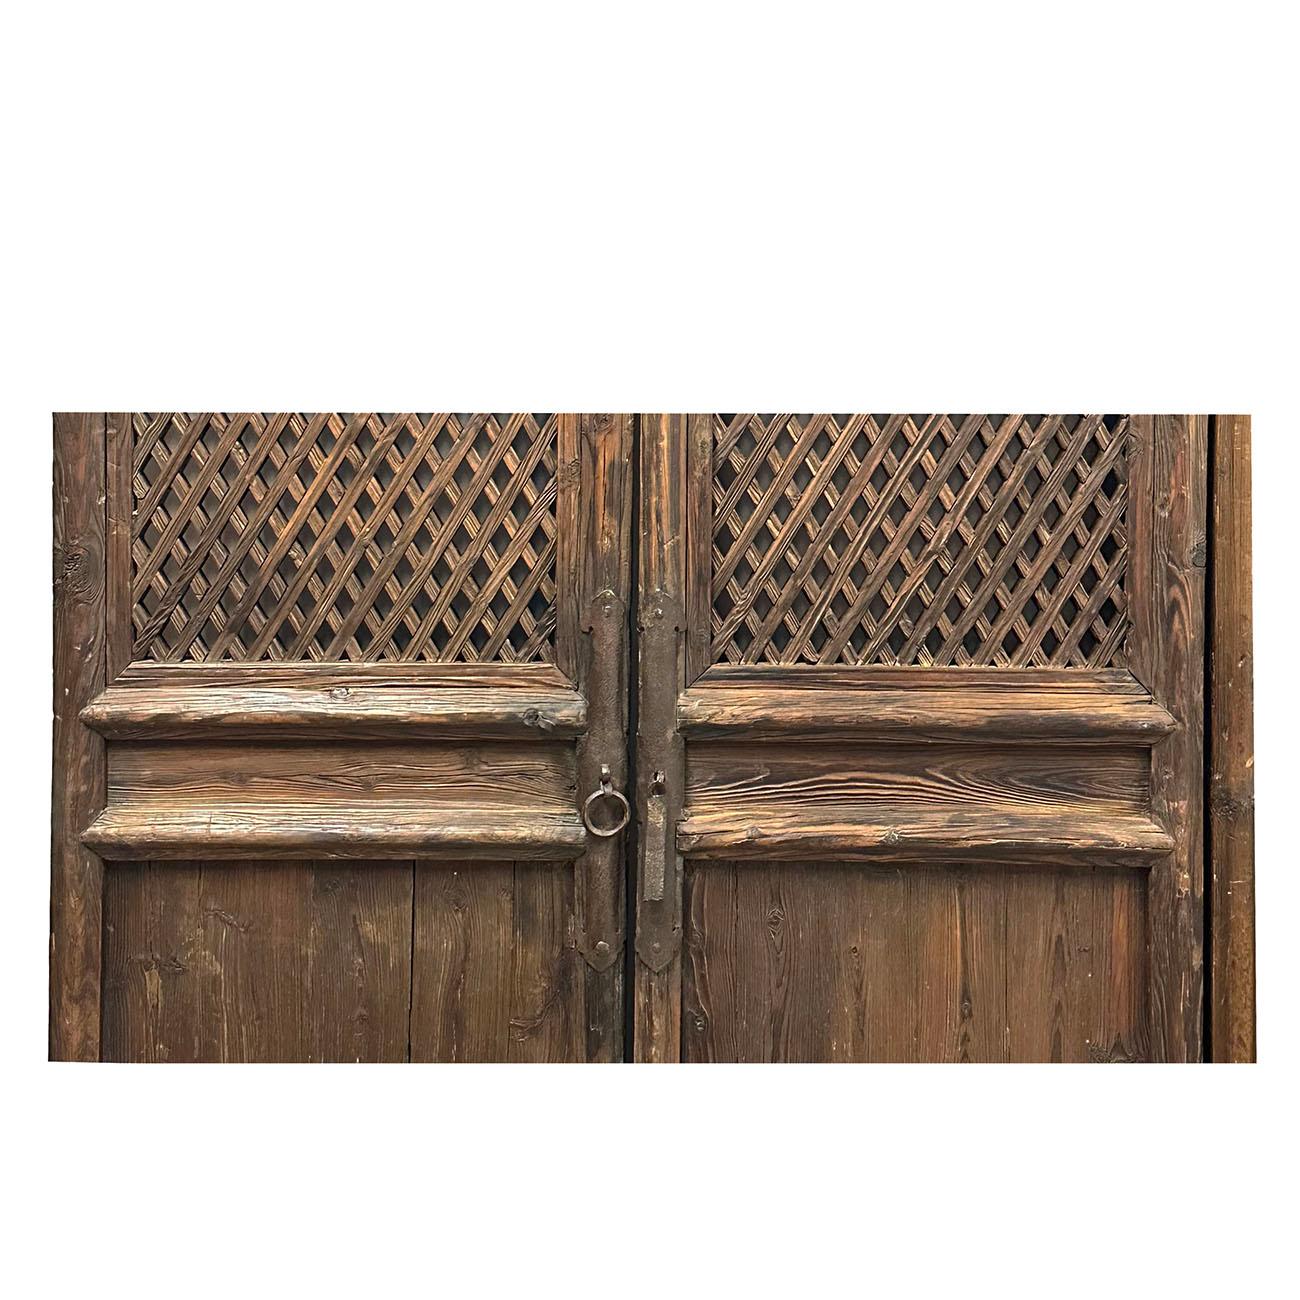 Carved Late 19th Century Antique Chinese Hand Made 4 Panels Wooden Screen/Room Divider